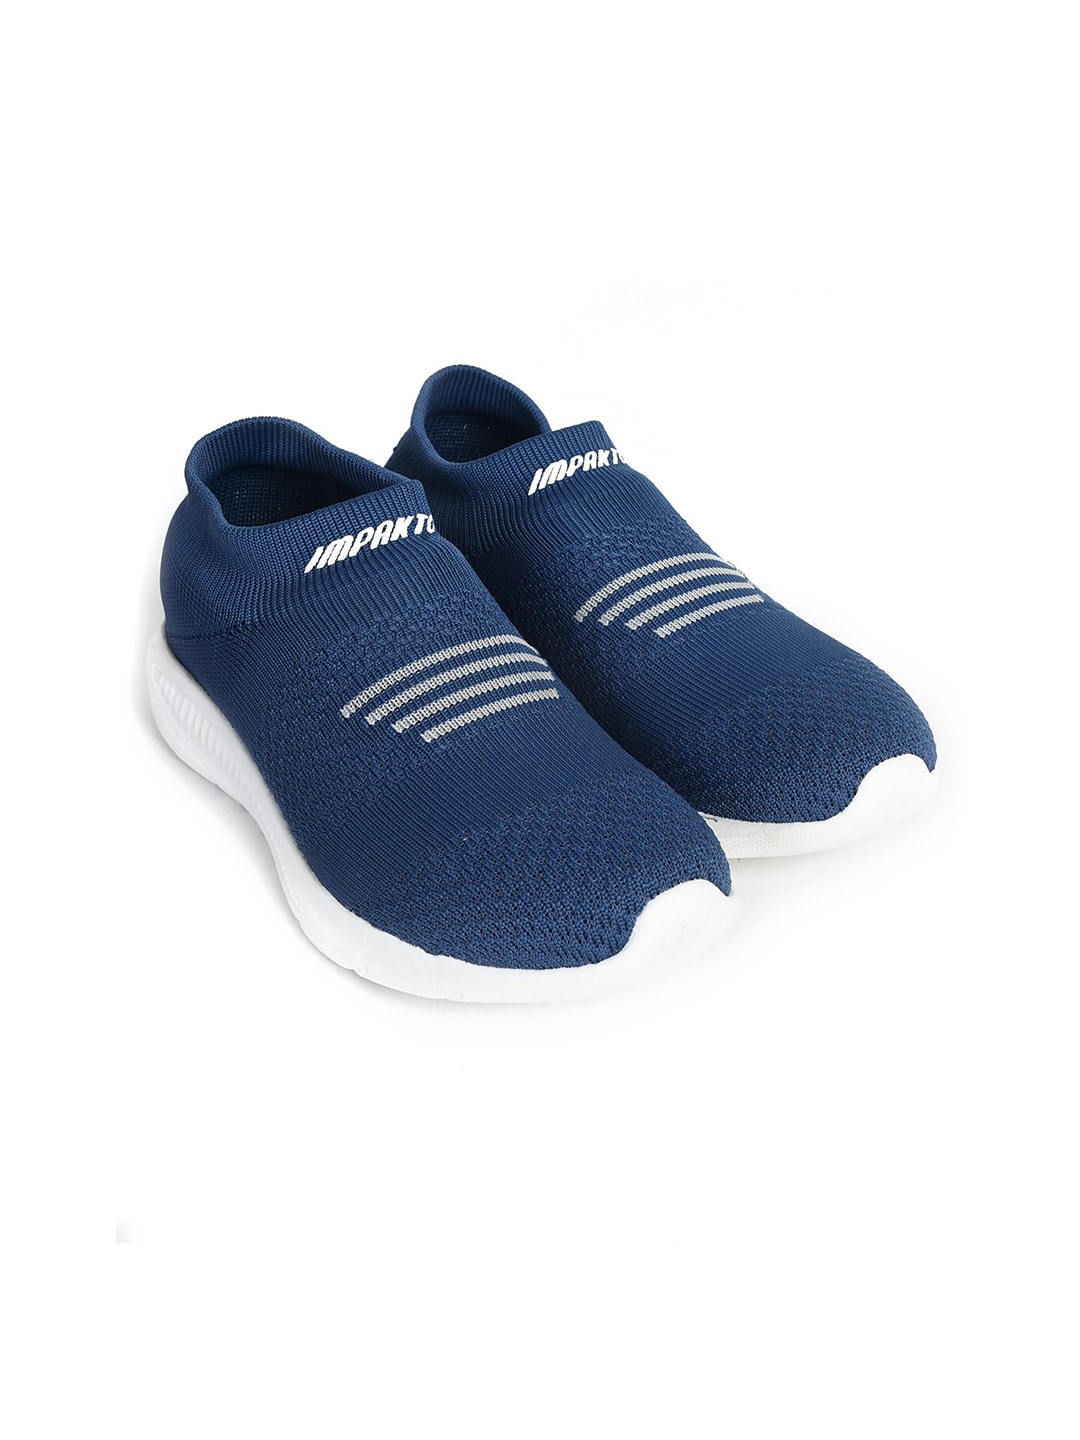 IMPAKTO Women Blue PU Running Non-Marking Sports Shoes Price in India